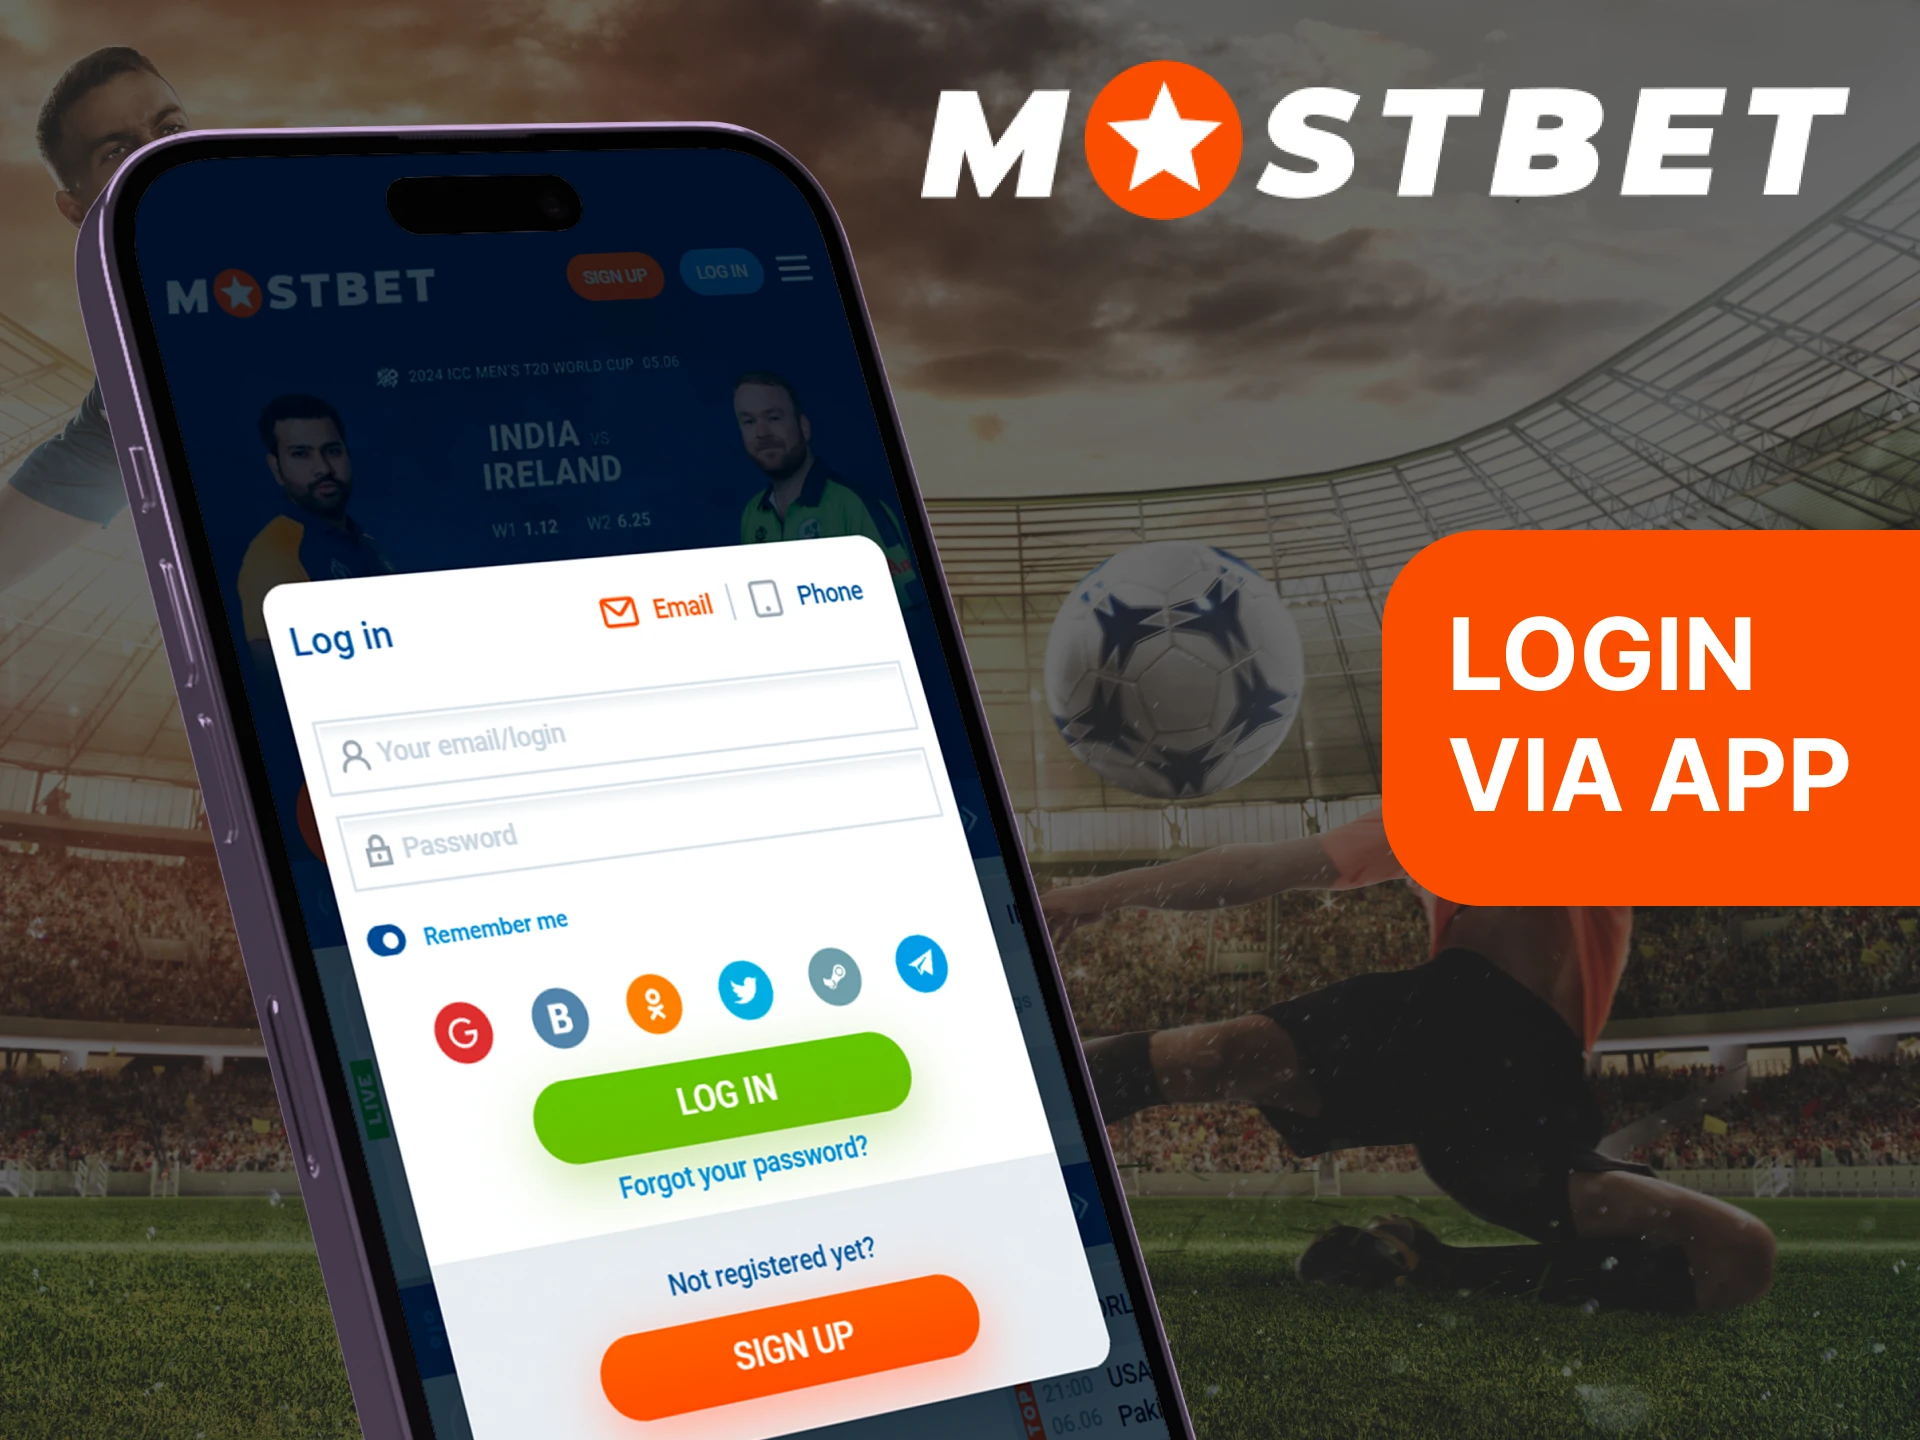 Download the Mostbet app to log into your account and place bets wherever you are.